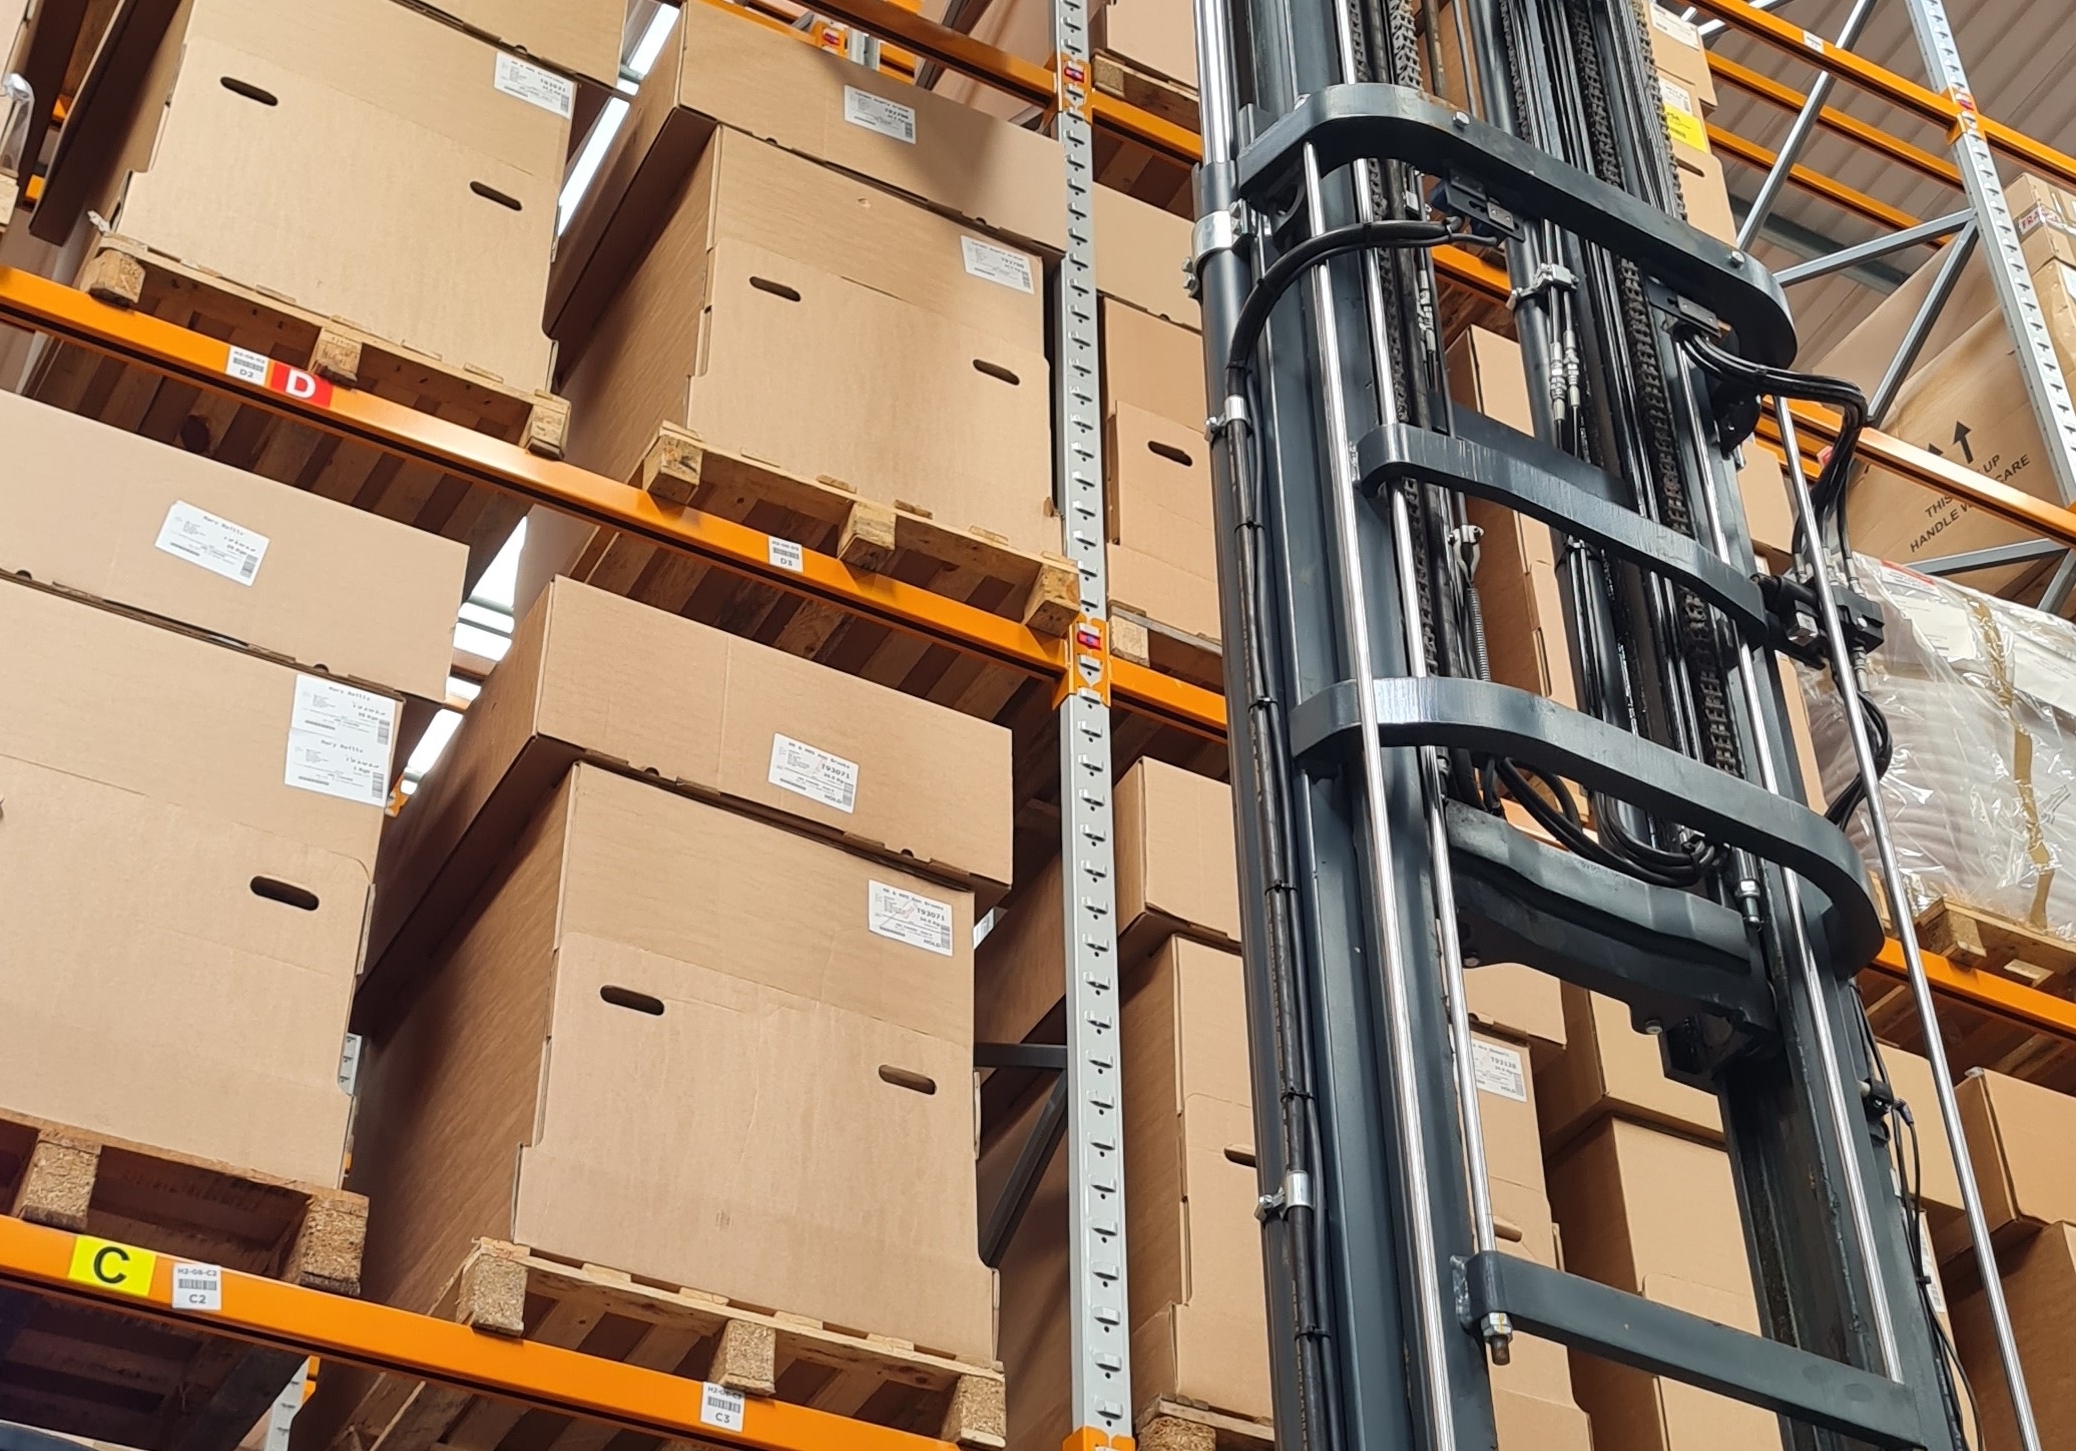 Dawsongroup material handling solutions designed to vertically increase your capacity in warehouses.